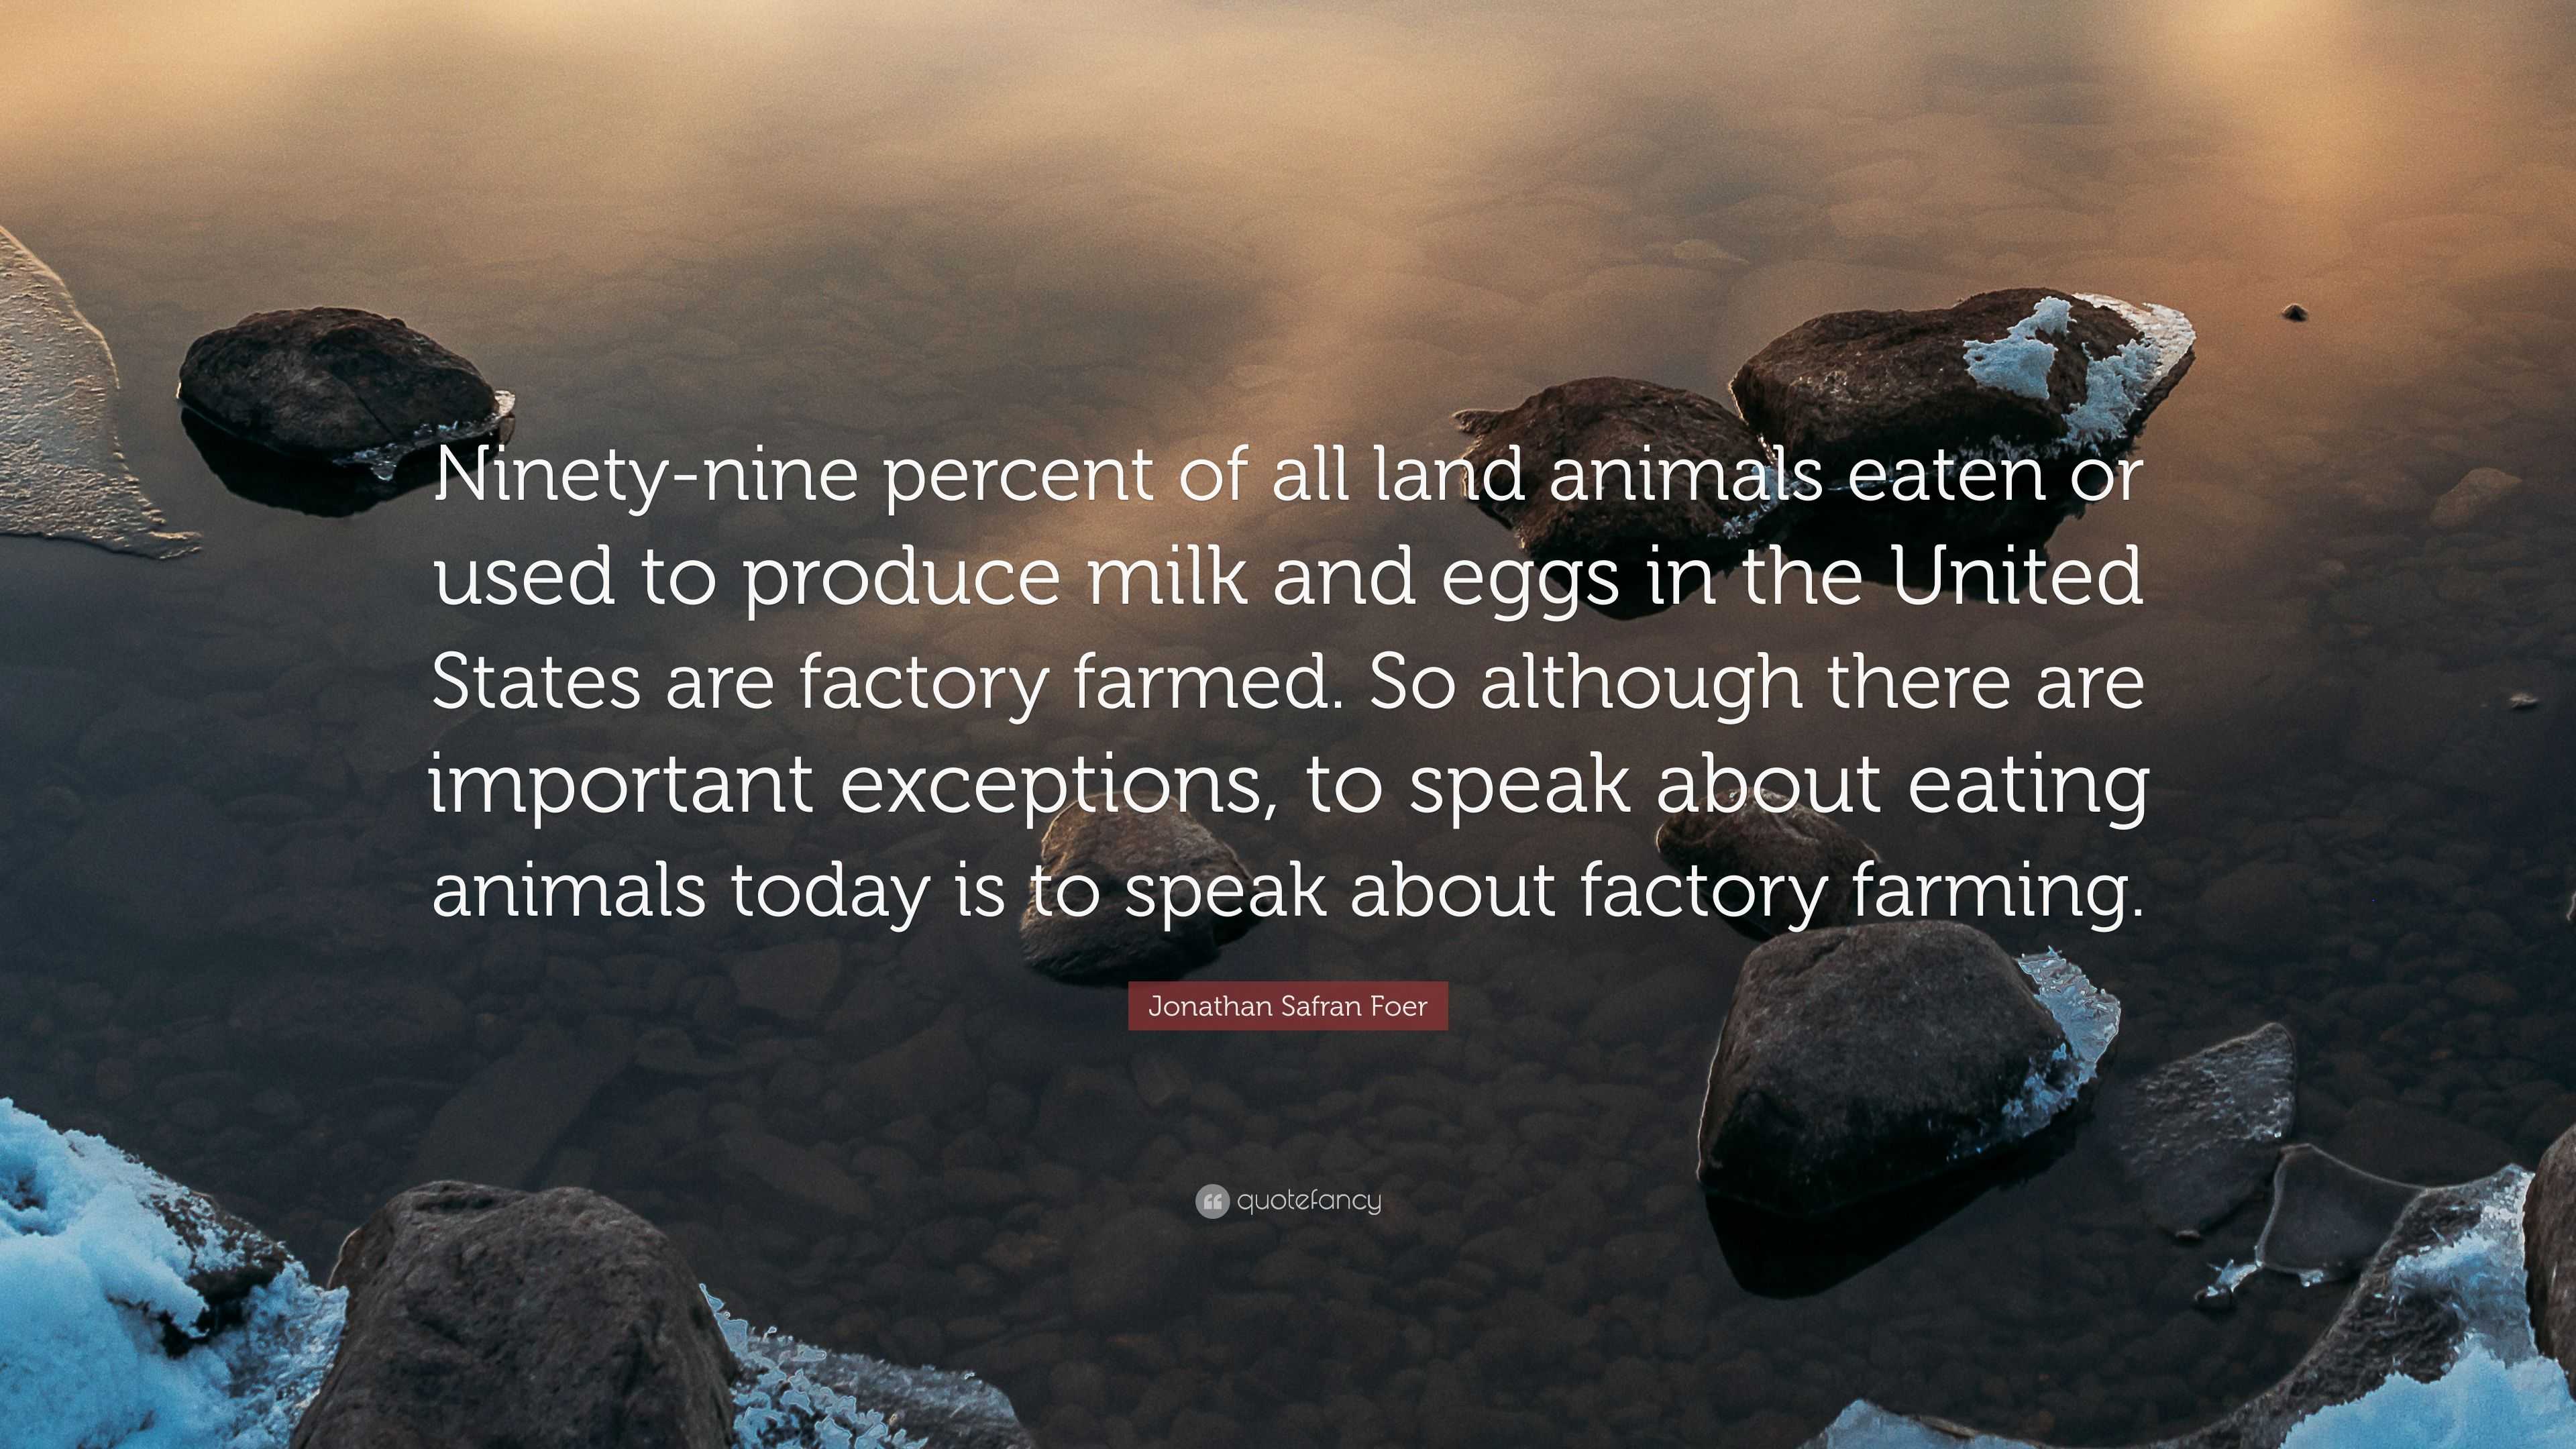 Jonathan Safran Foer Quote: “Ninety-nine percent of all land animals eaten  or used to produce milk and eggs in the United States are factory farmed.  ...”